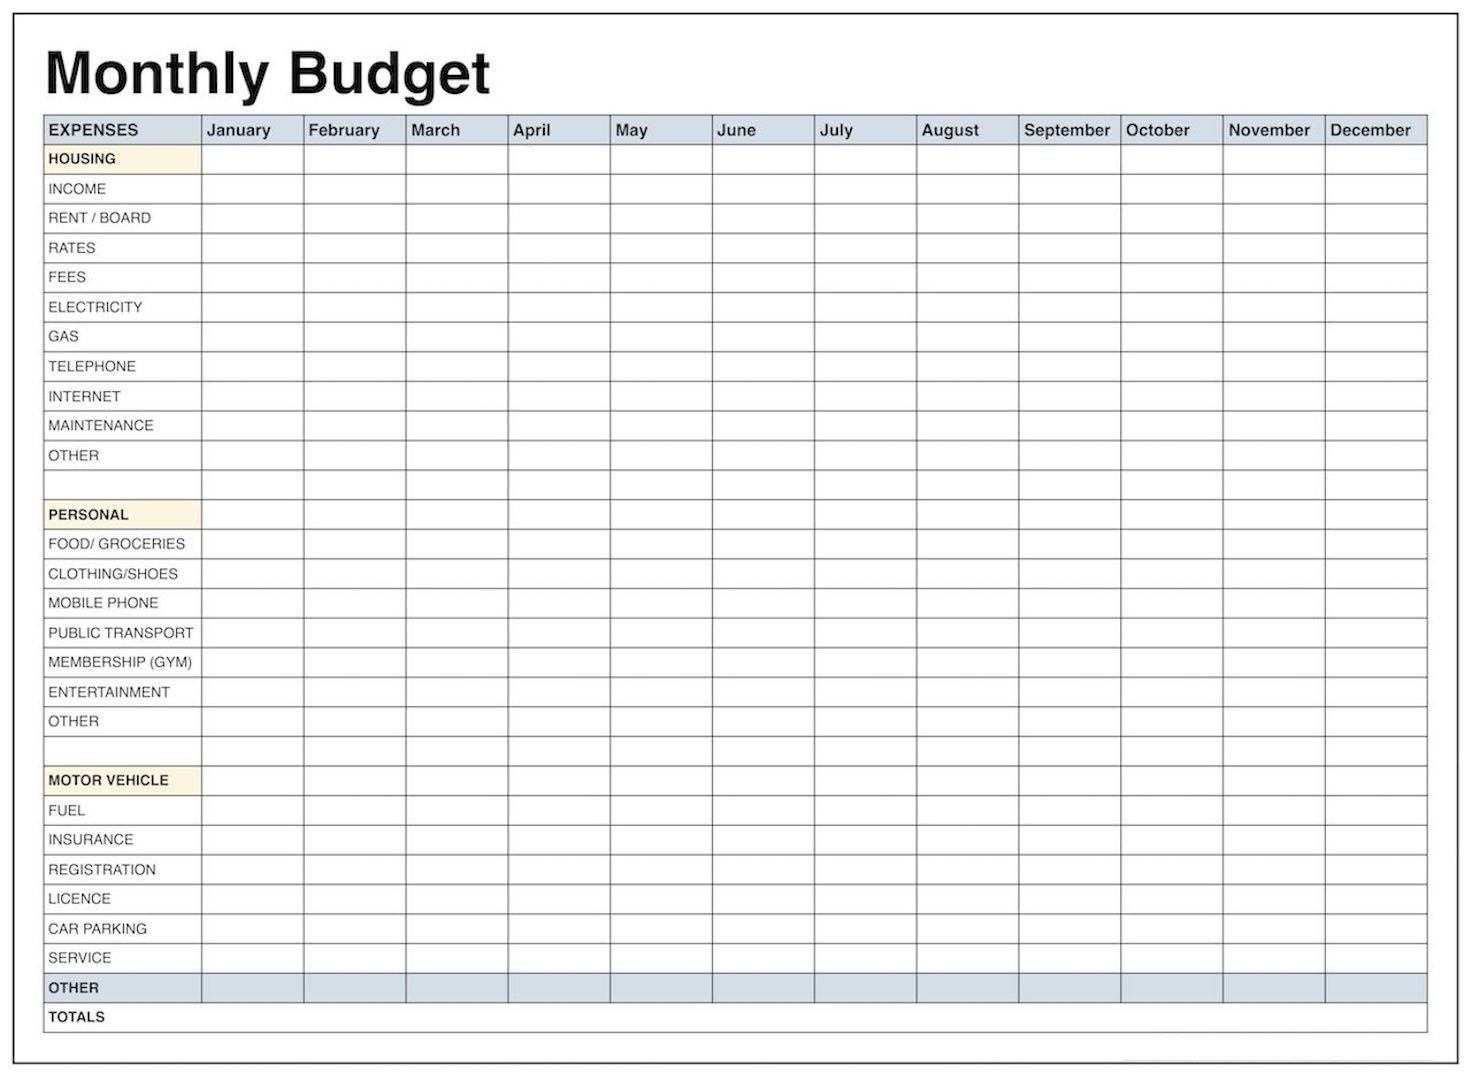 020 Template Ideas Monthly Budget Beautiful Planner Pinterest Excel - Free Printable Monthly Budget